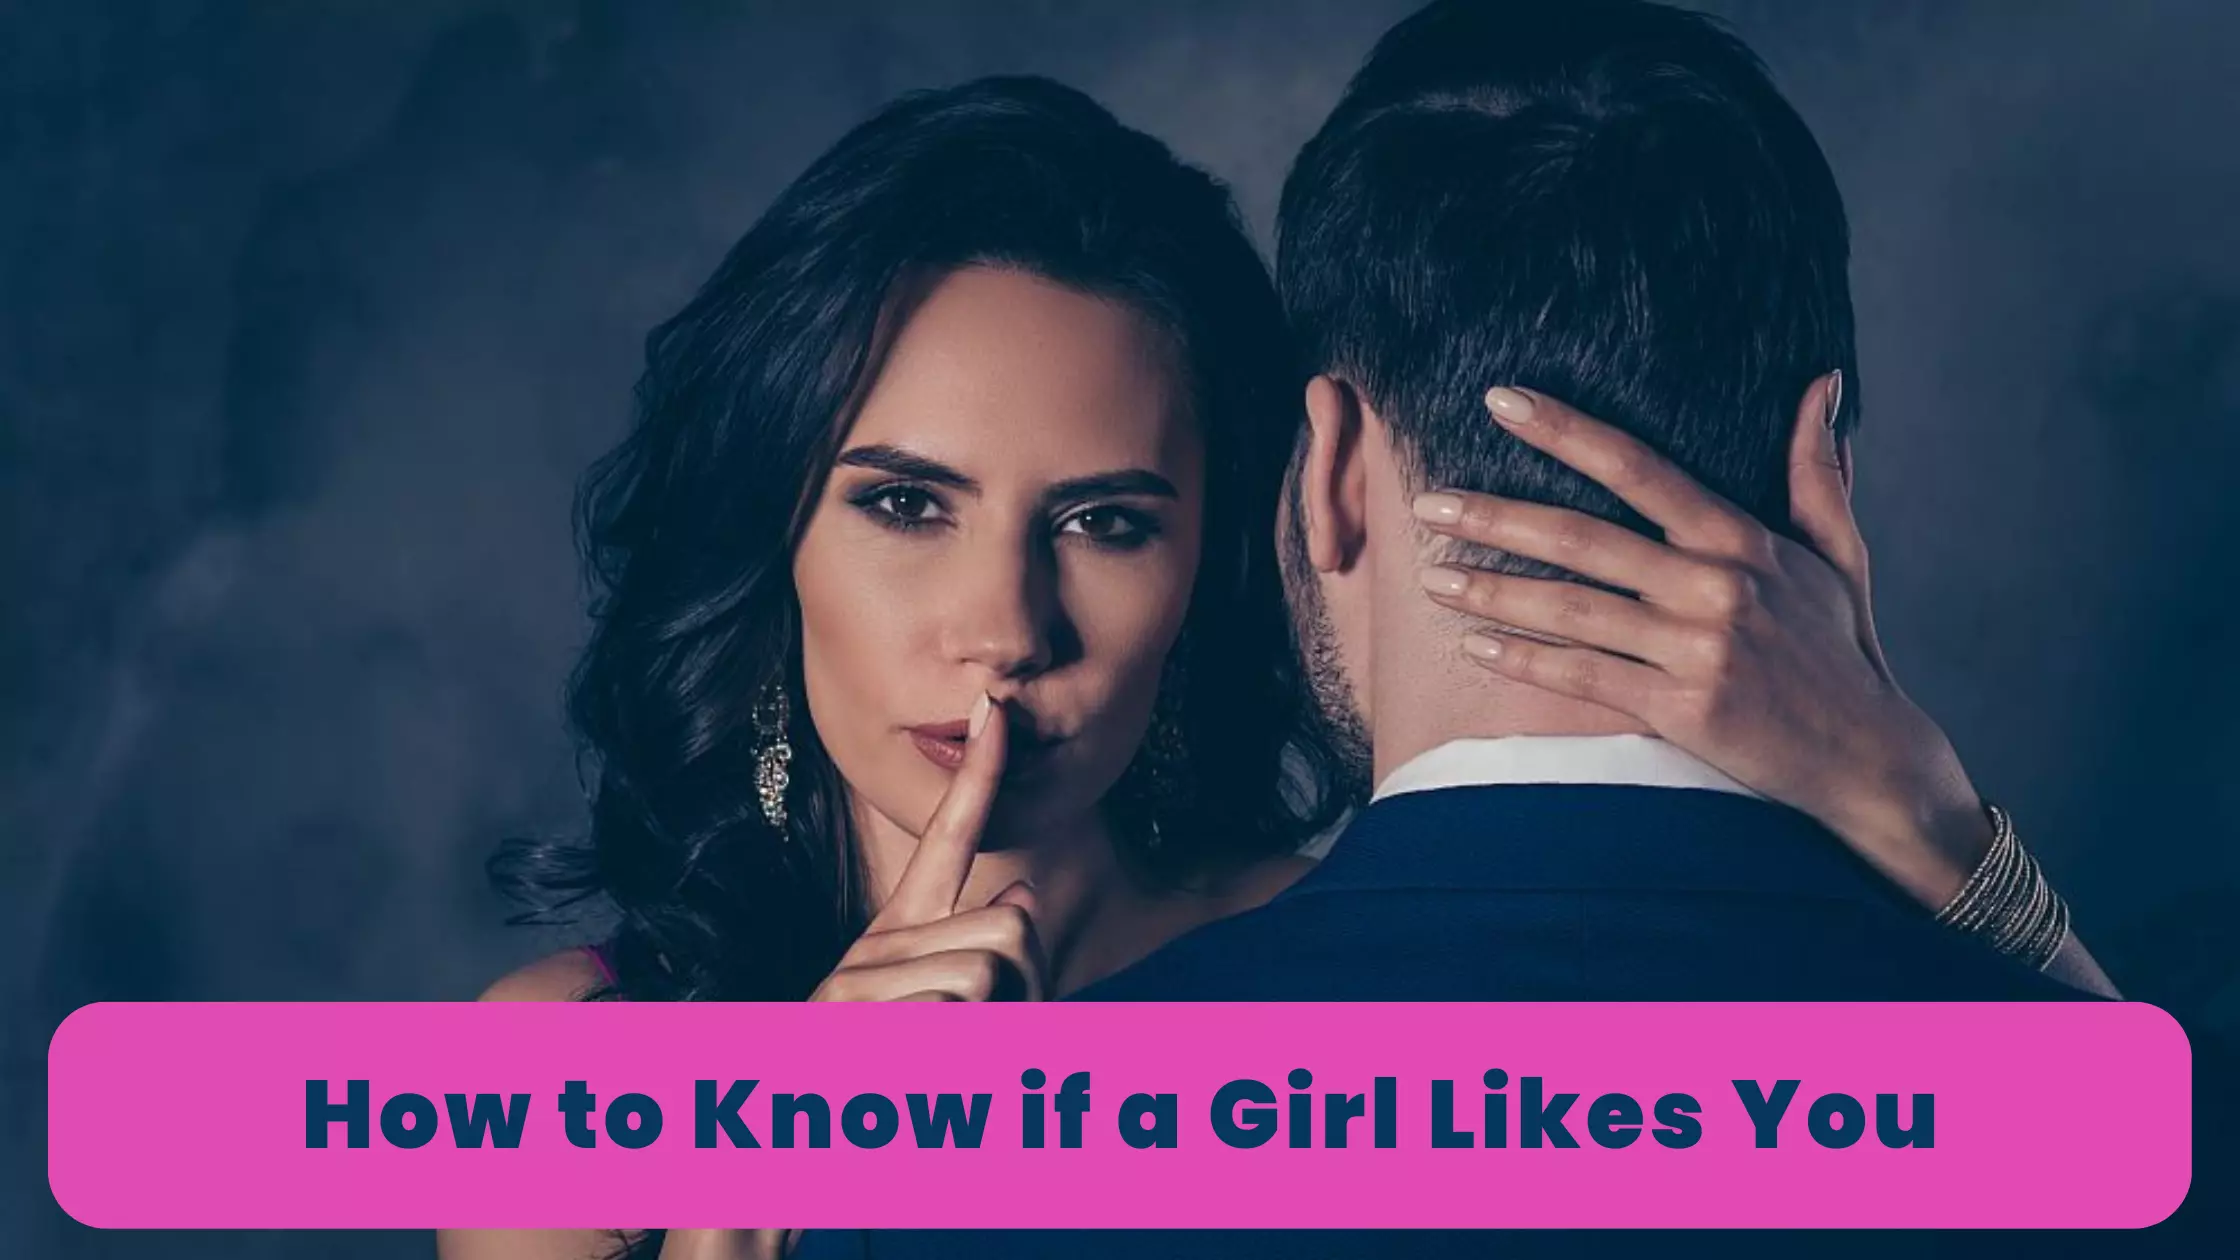 How to Know if a Girl Likes You